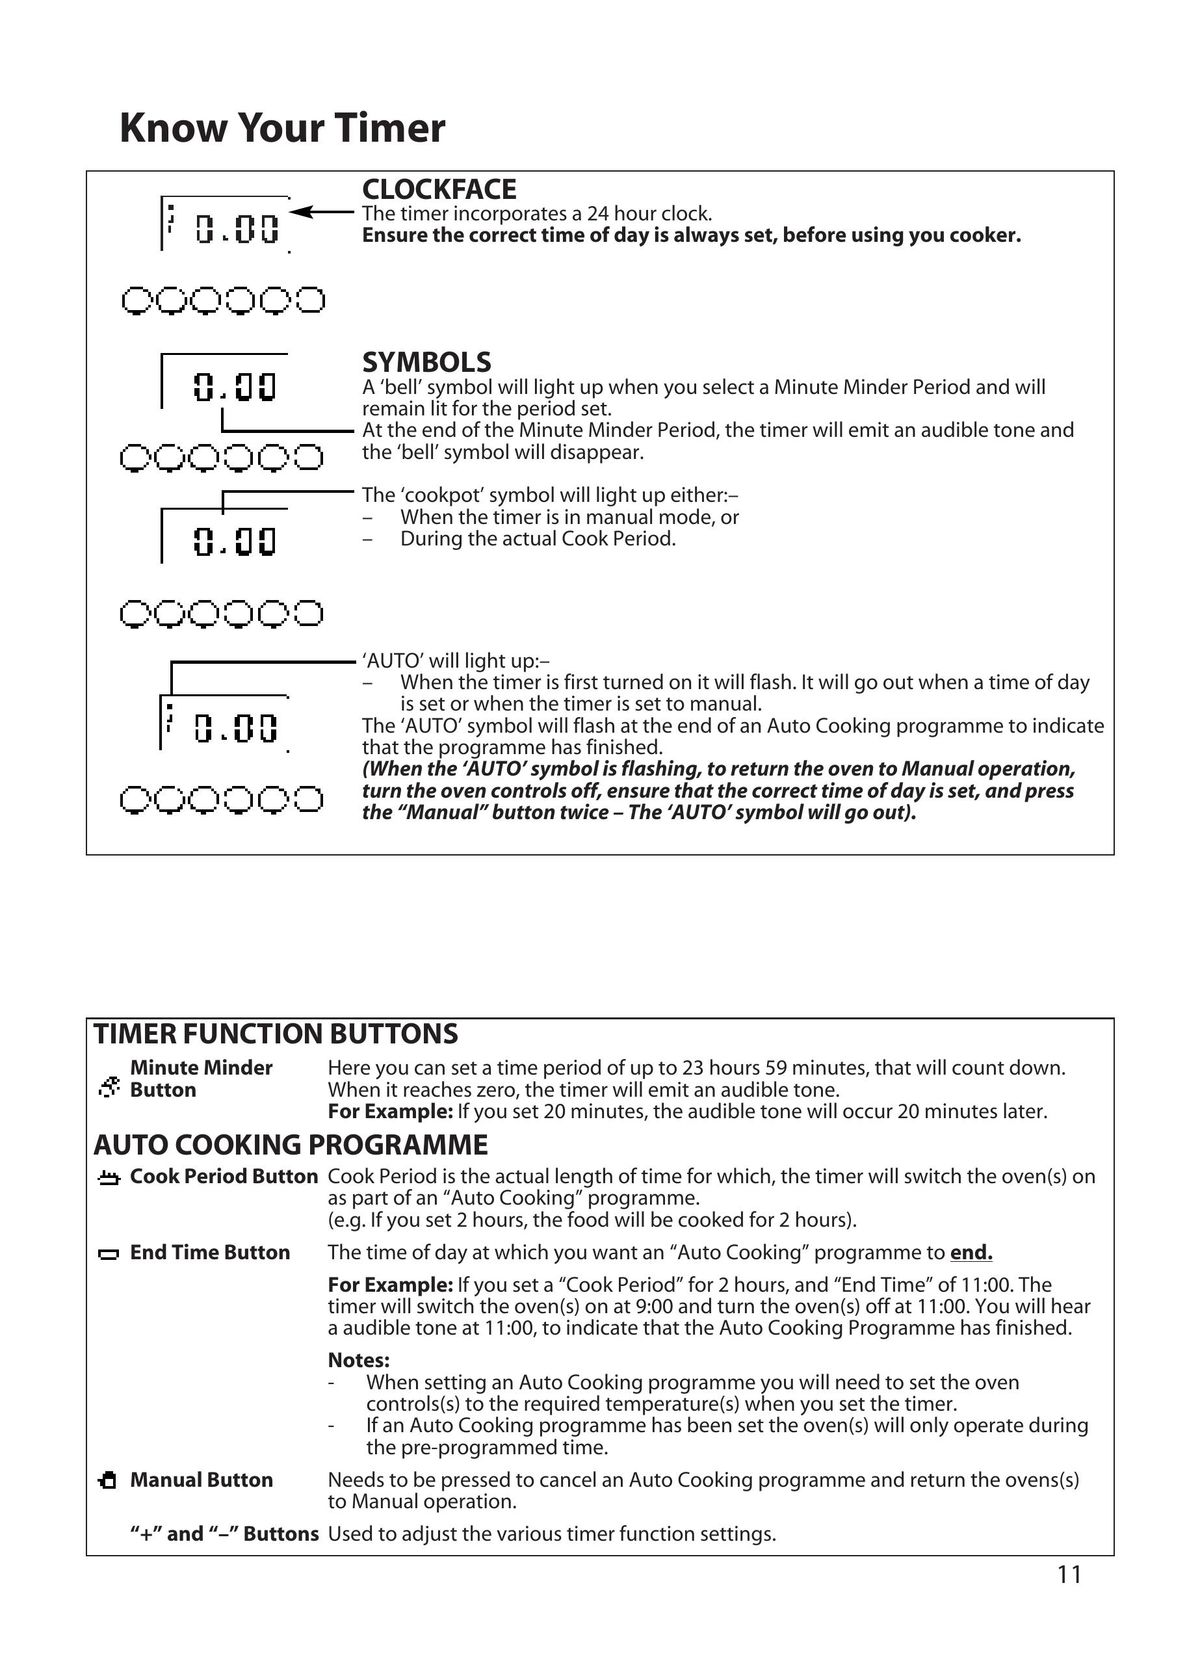 Hotpoint BD32 Microwave Oven User Manual (Page 11)